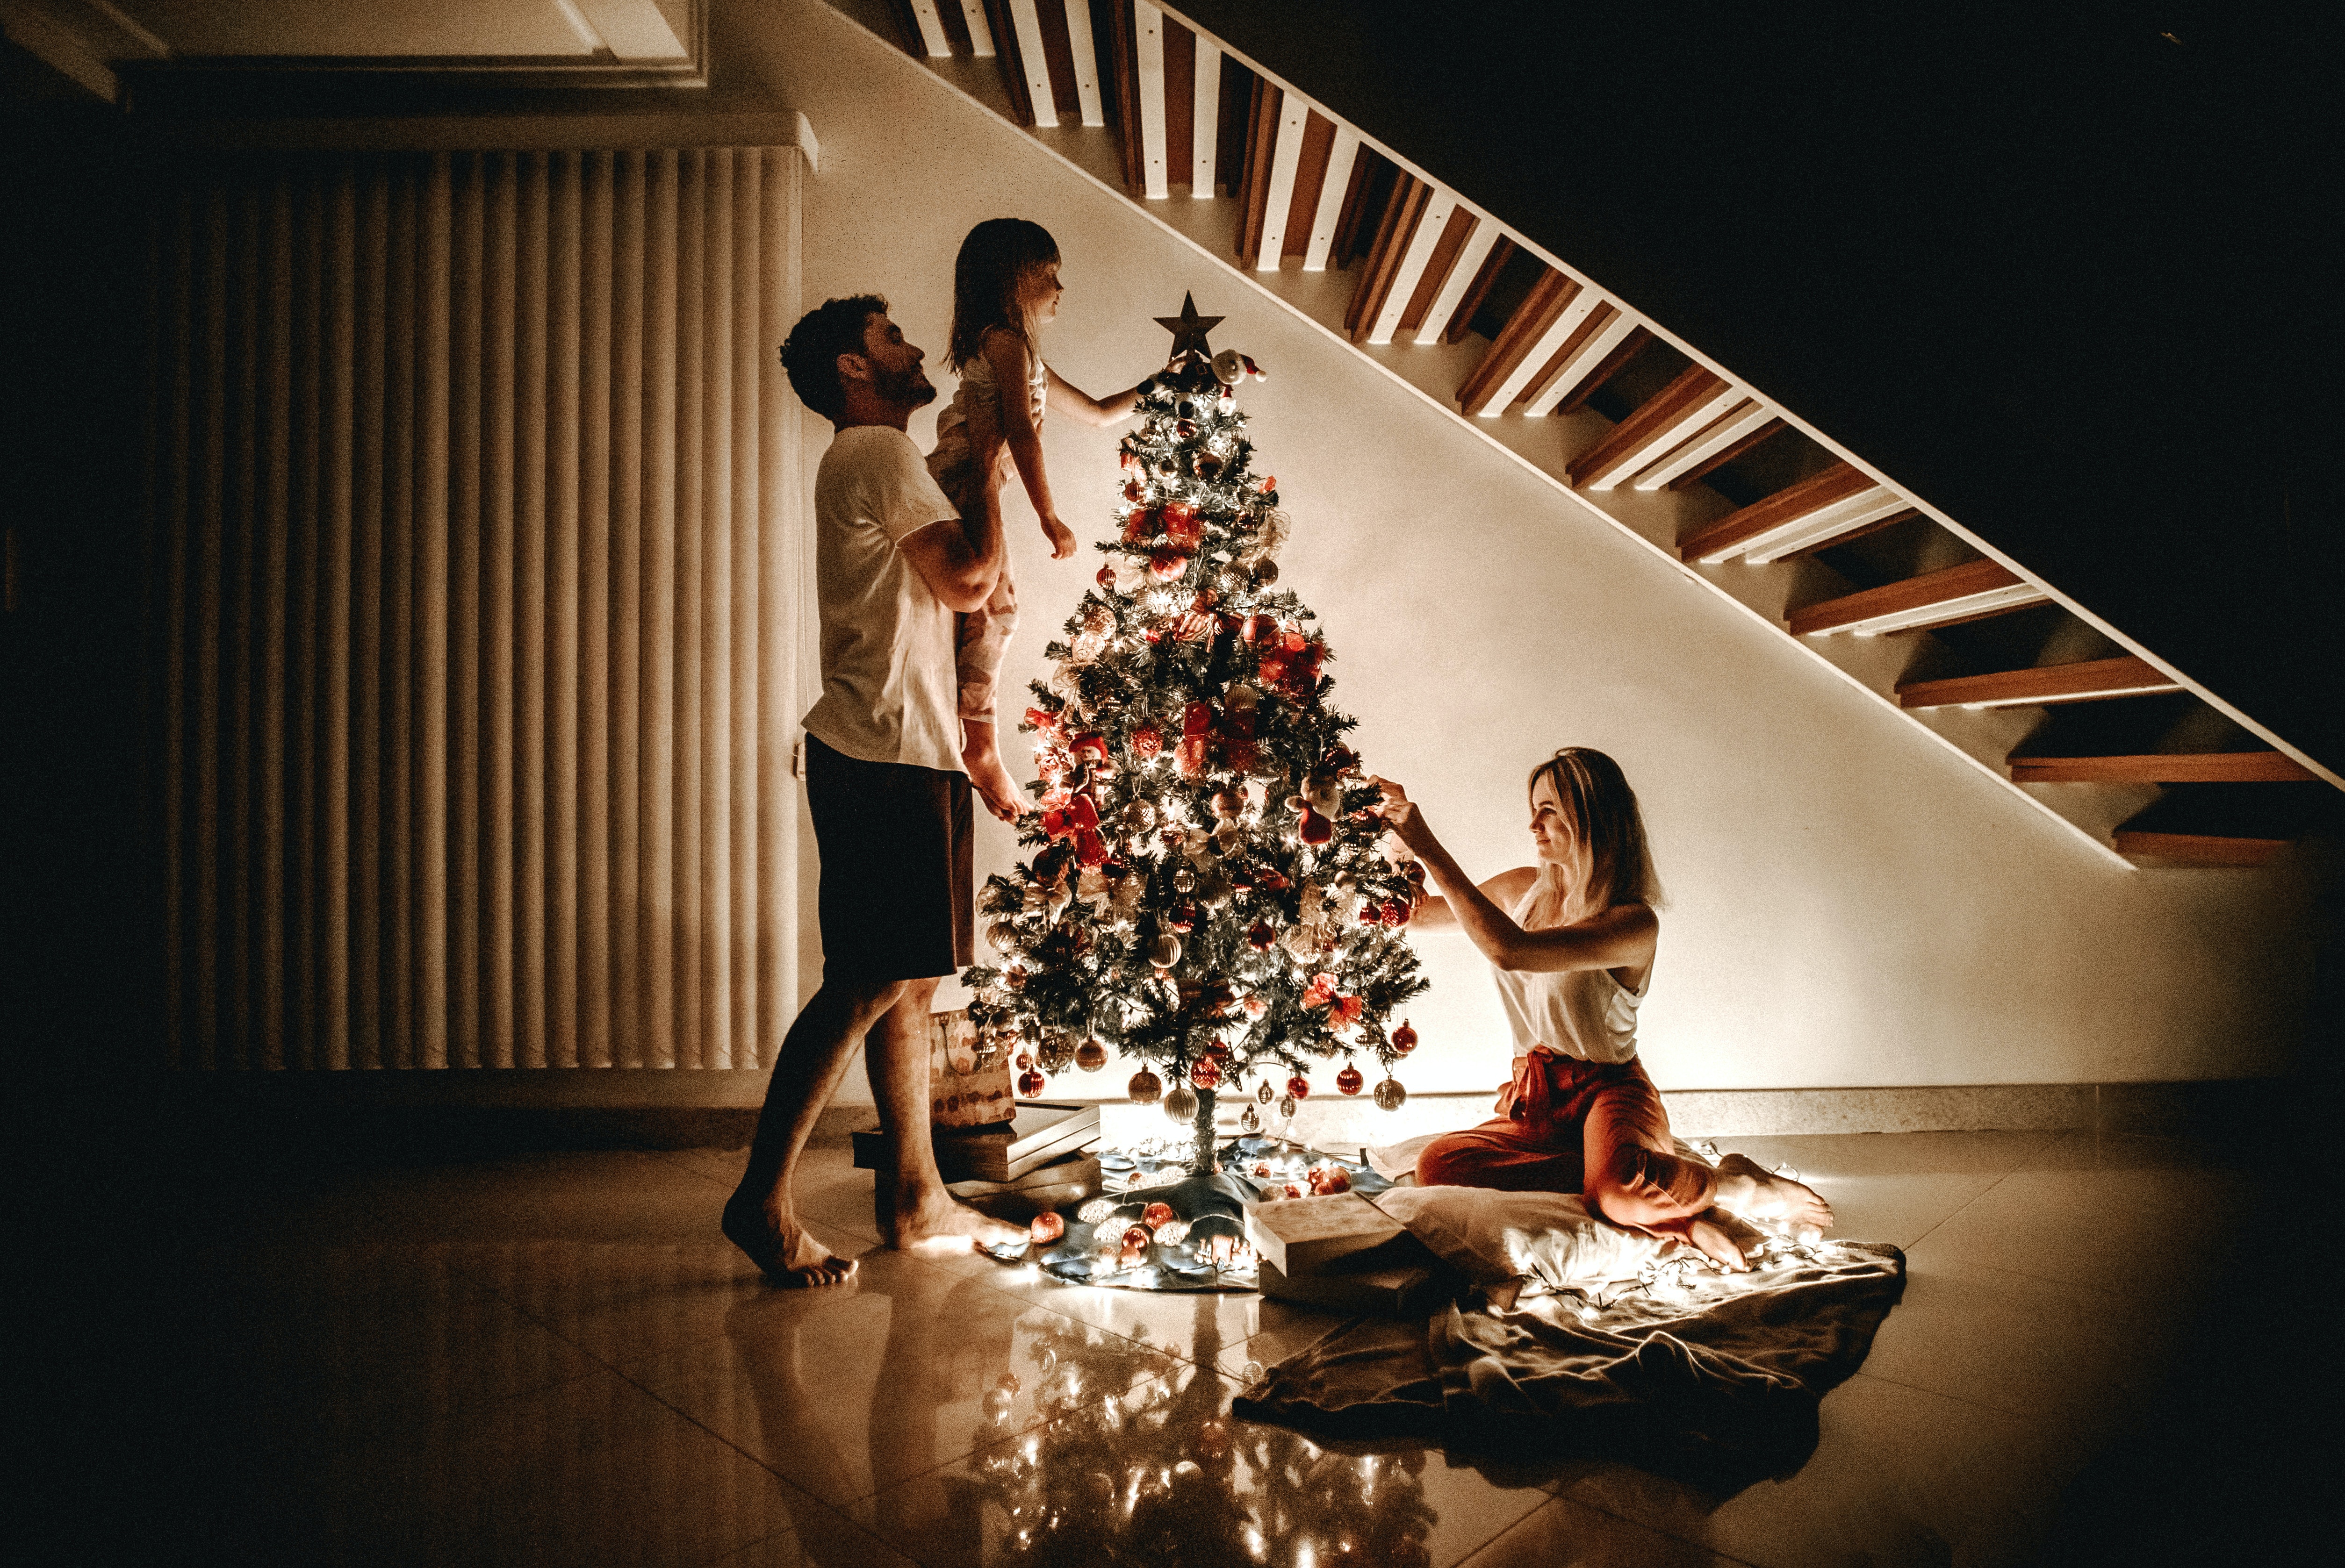 Christmas activities an traditions for families